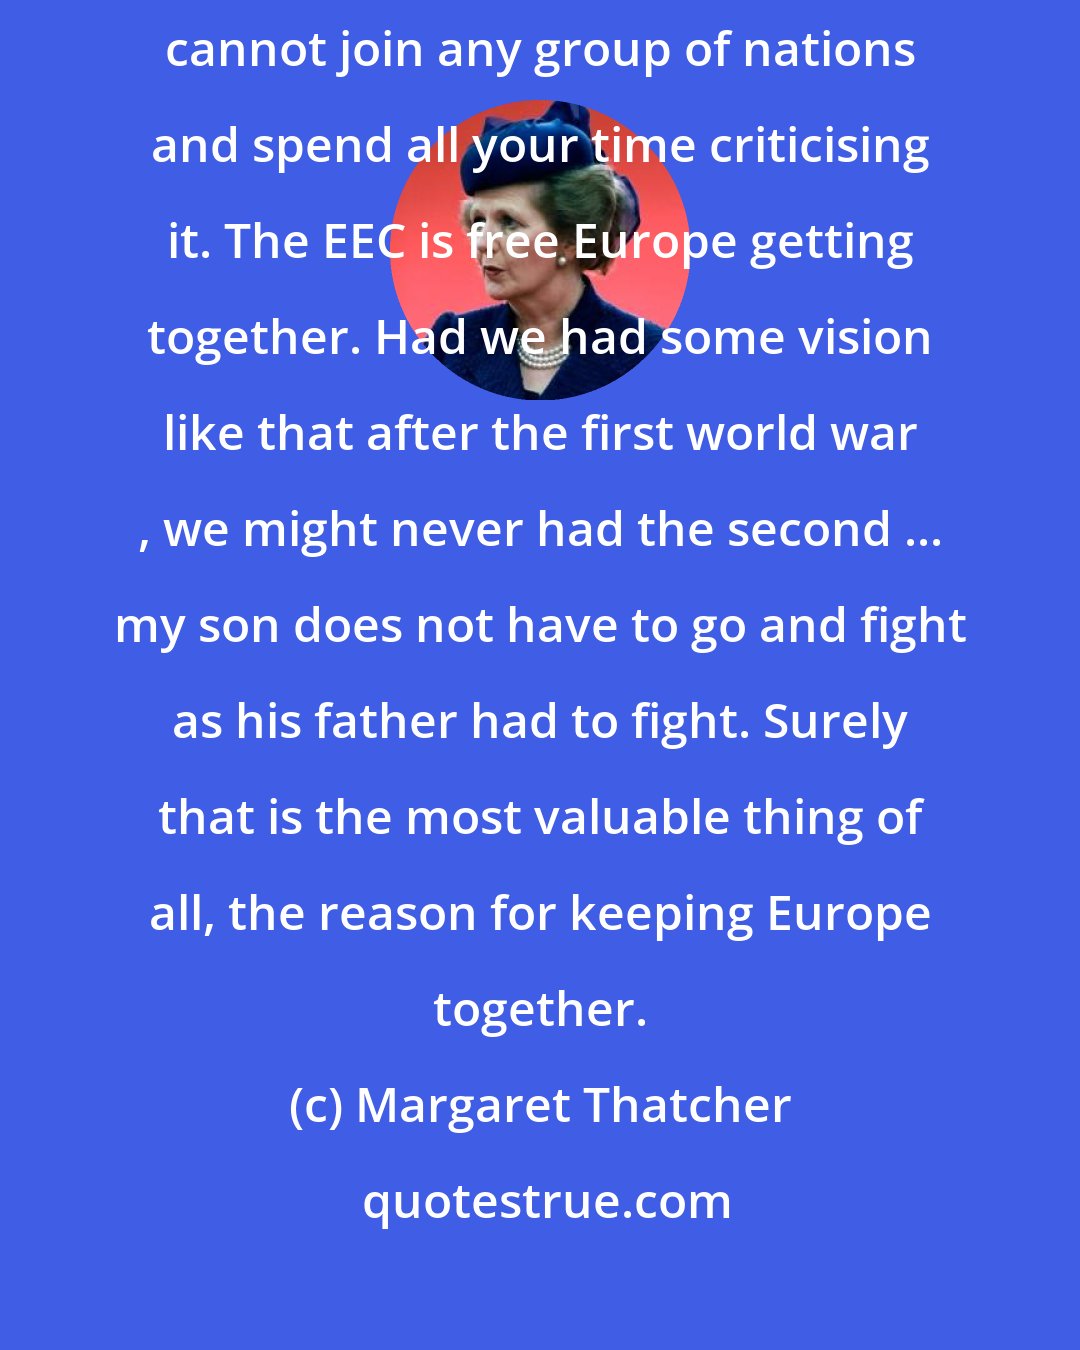 Margaret Thatcher: I think our support for the EEC has been very half-hearted. You really cannot join any group of nations and spend all your time criticising it. The EEC is free Europe getting together. Had we had some vision like that after the first world war , we might never had the second ... my son does not have to go and fight as his father had to fight. Surely that is the most valuable thing of all, the reason for keeping Europe together.